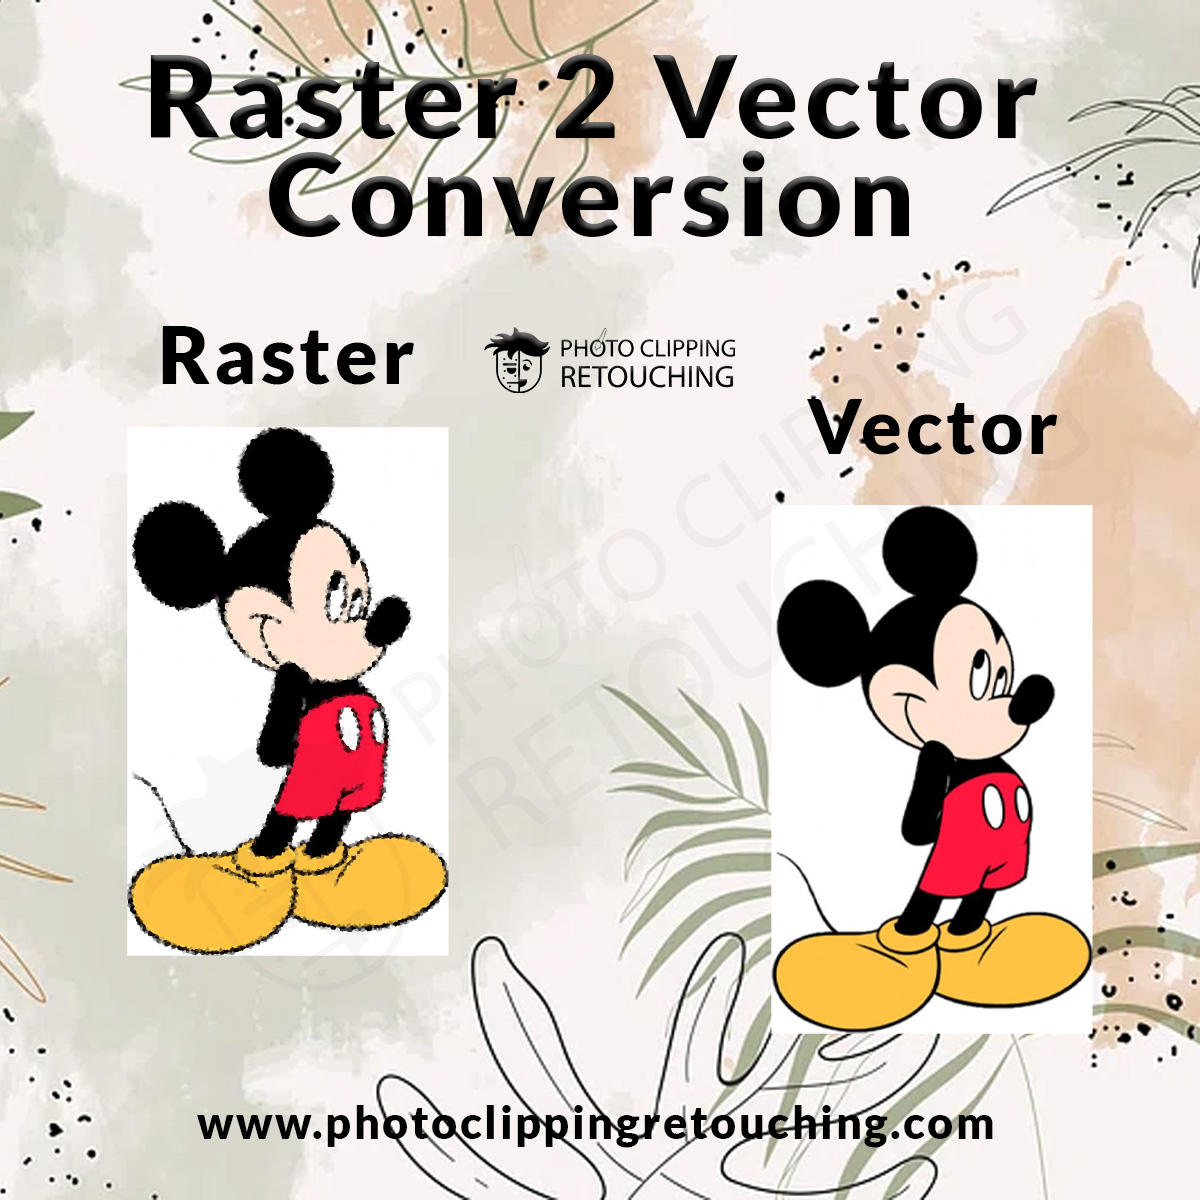 Upgrade your digital artwork effortlessly with our Raster to Vector Conversion Service! 
#RasterToVector #DigitalArt #VectorMagic #RasterConversion #PhotoEditing #EditingServices #GraphicDesign #teamPCR

Email: info@photoclippingretouching.com
Link: photoclippingretouching.com/raster-to-vect…